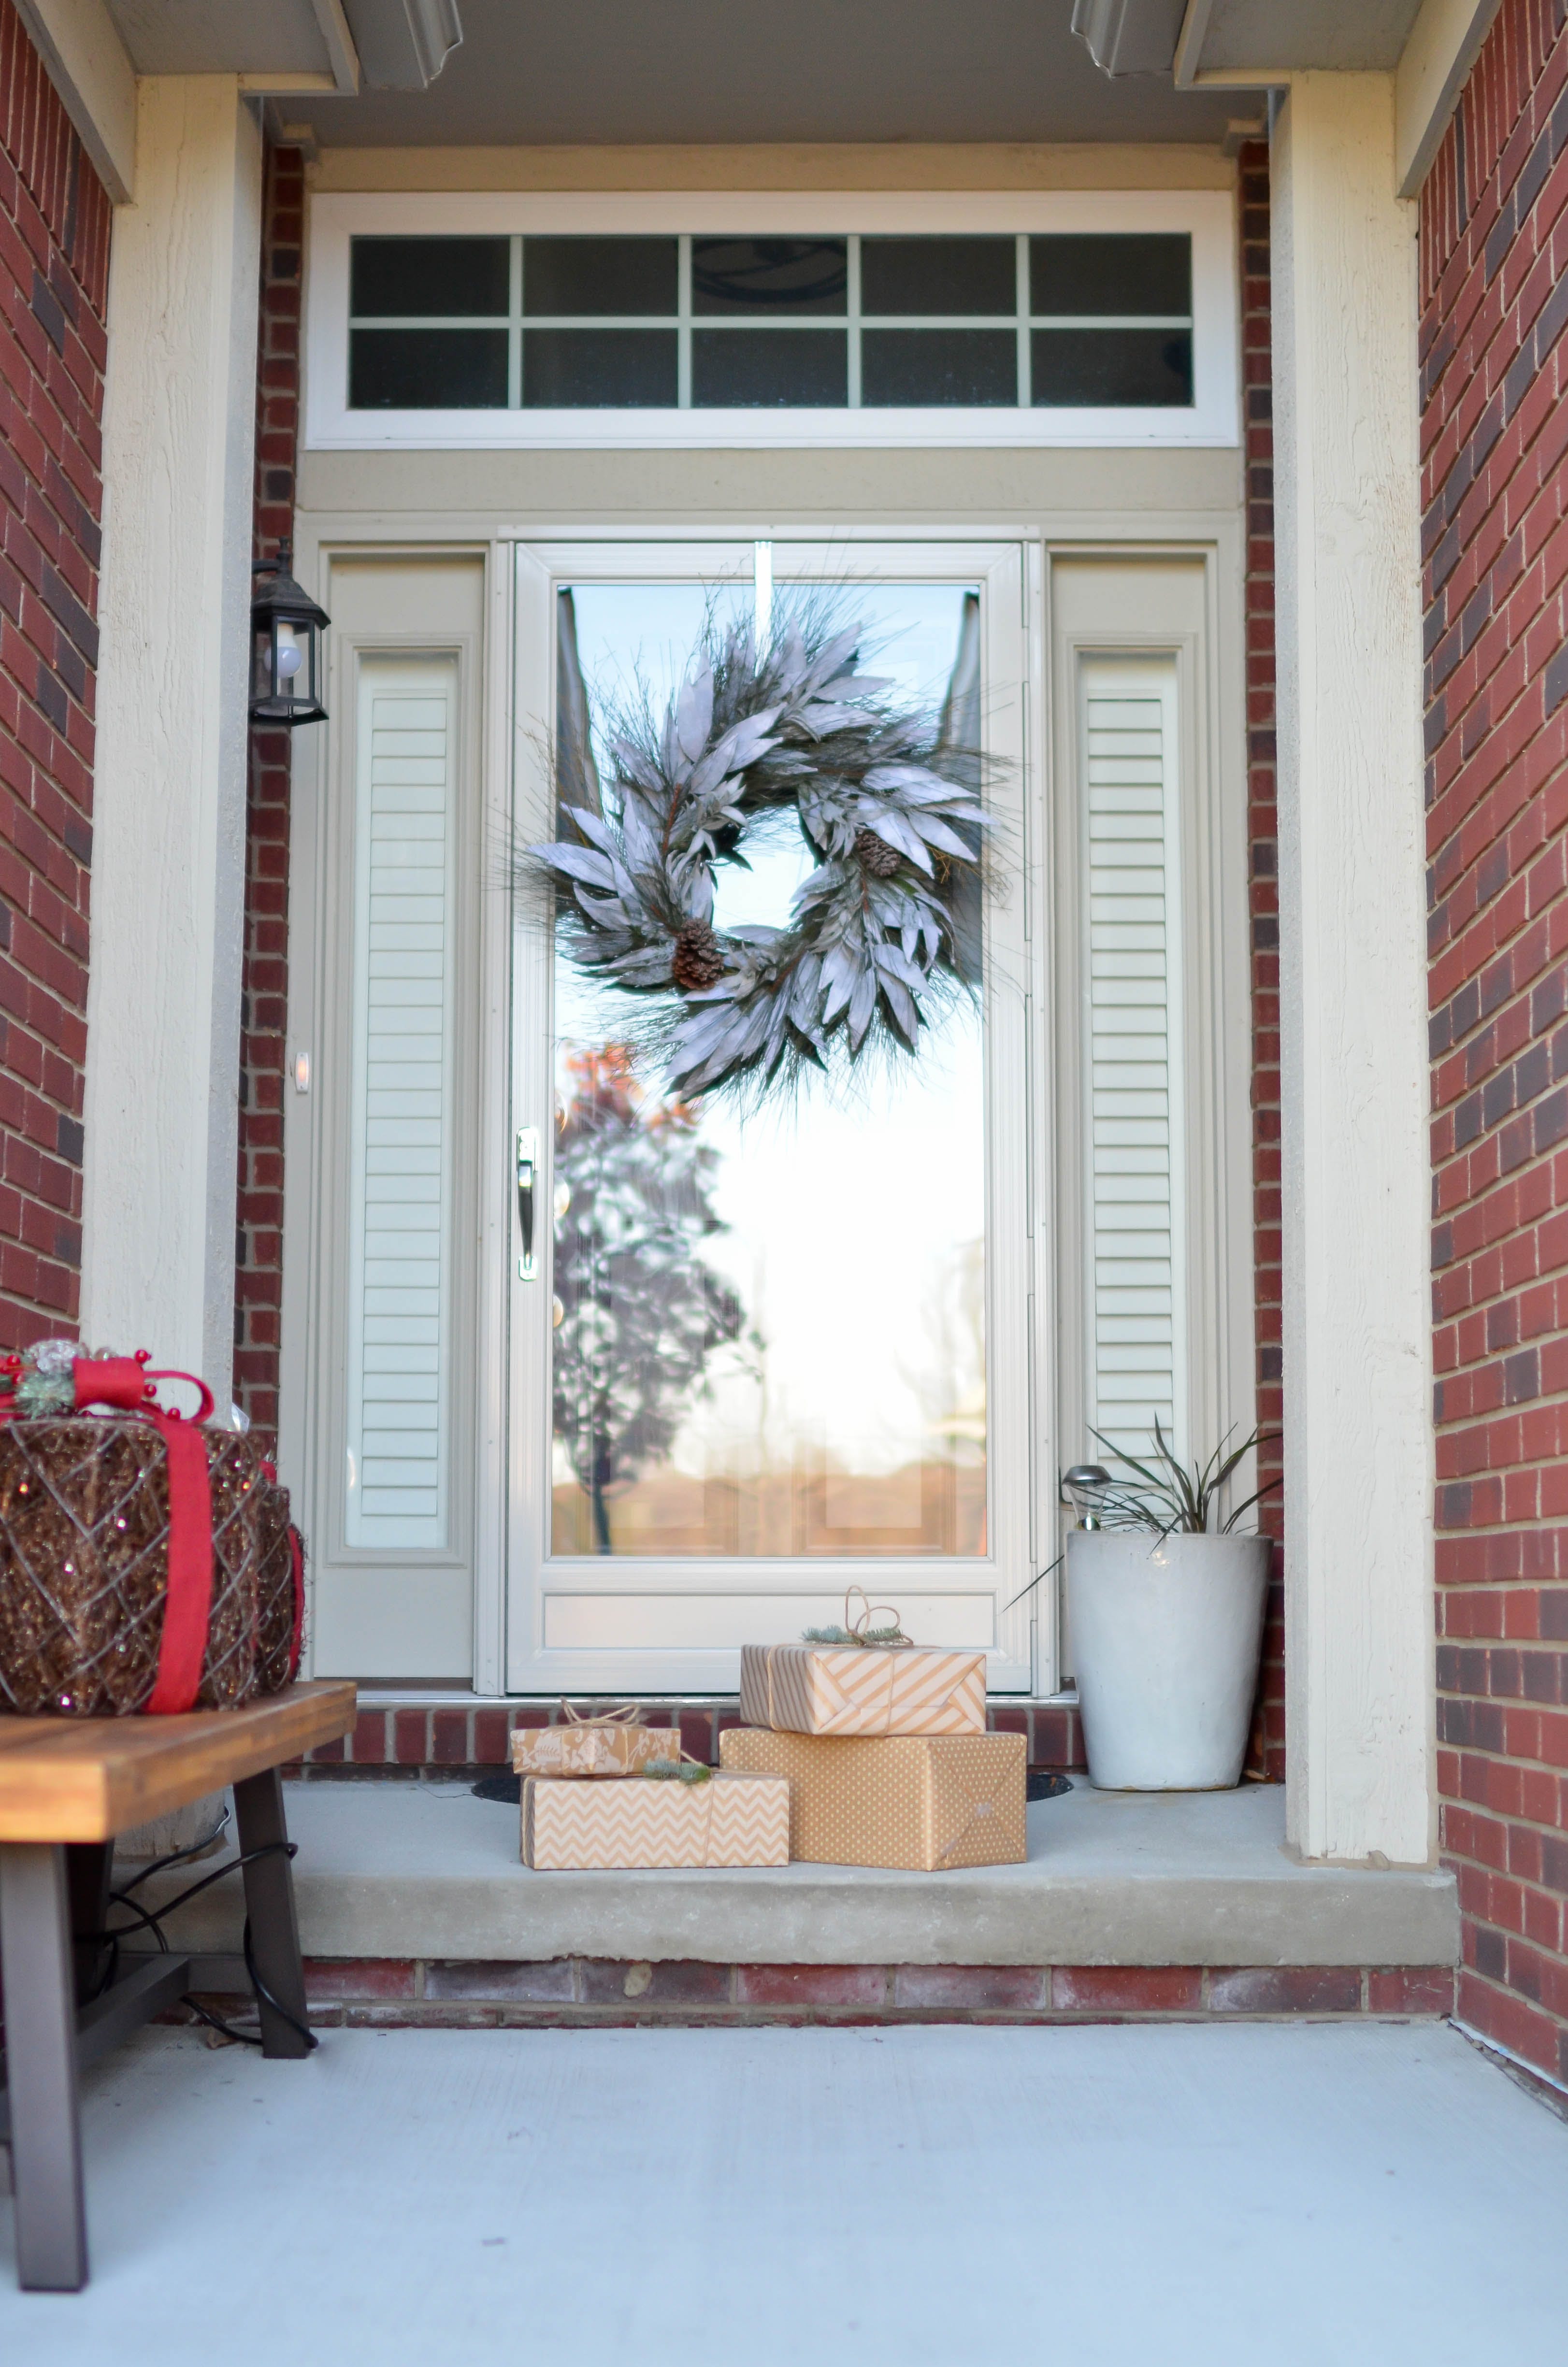 A photo of Packages left on the doorstep. | Source: Pexels